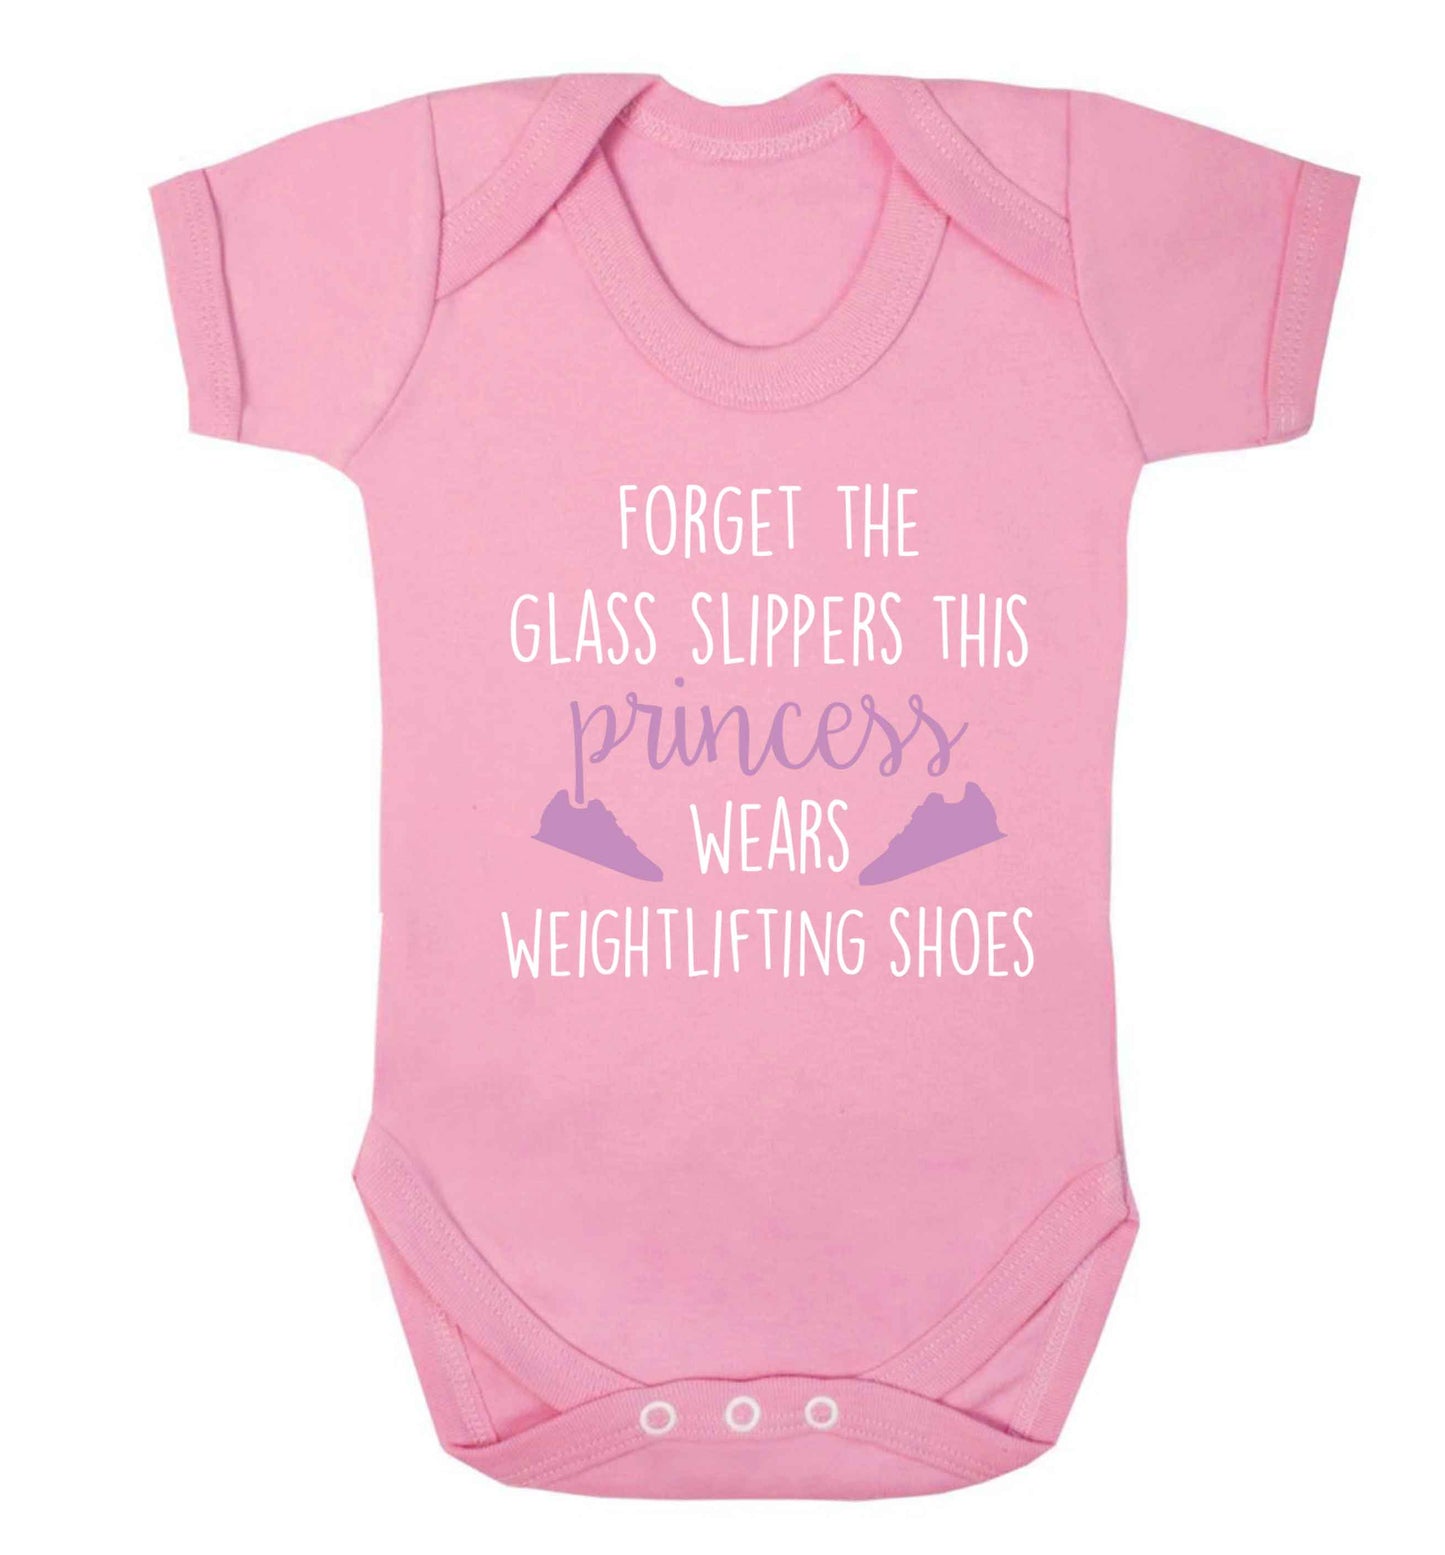 Forget the glass slippers this princess wears weightlifting shoes Baby Vest pale pink 18-24 months